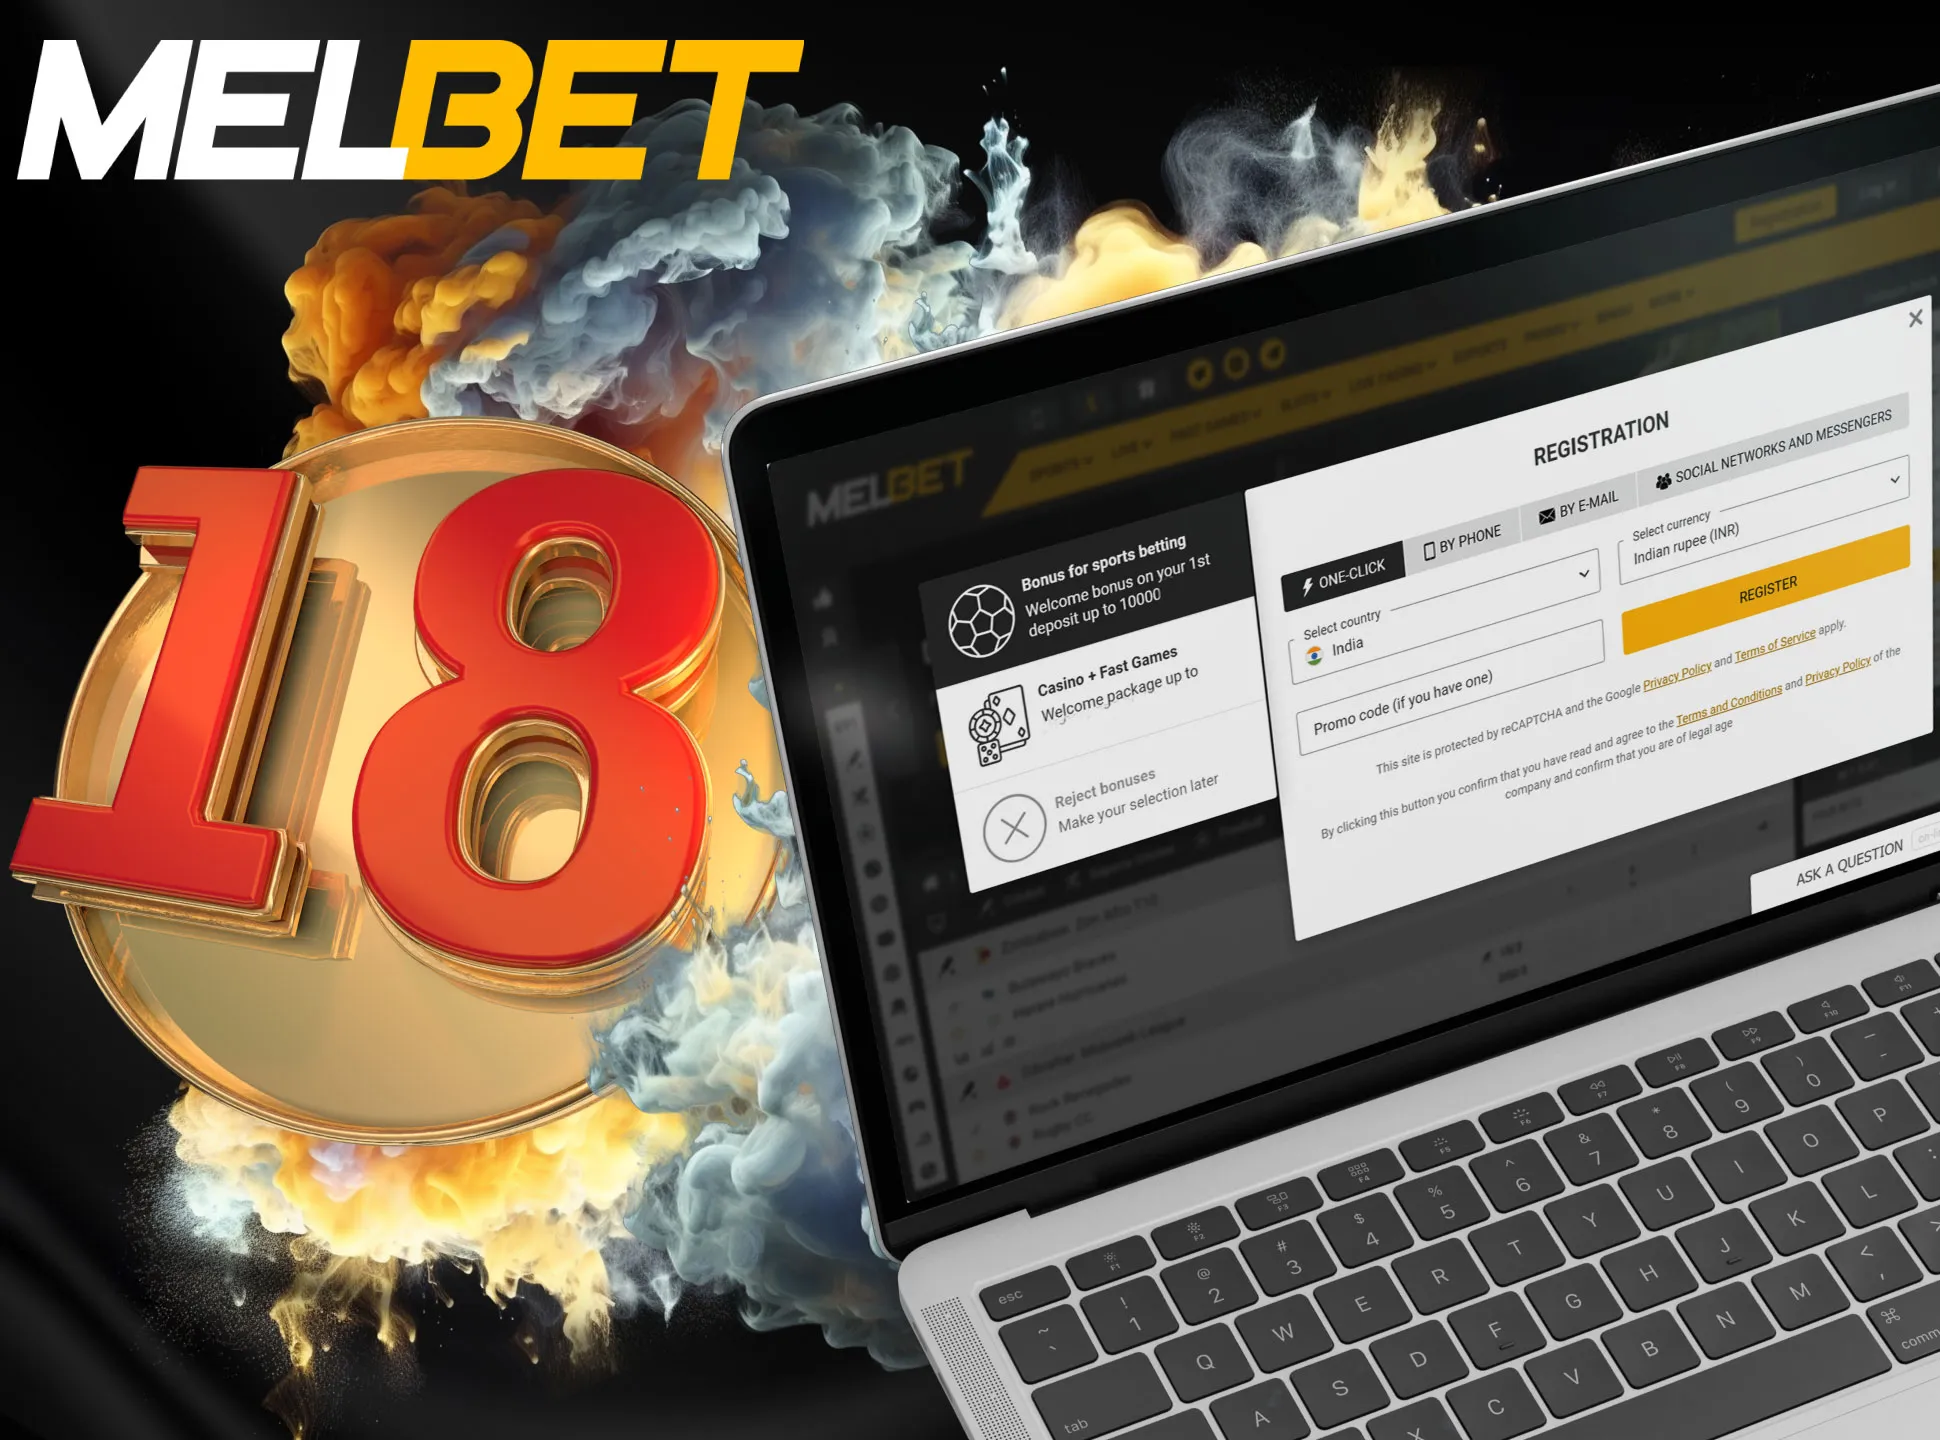 Every Melbet user should be over 18 years old.